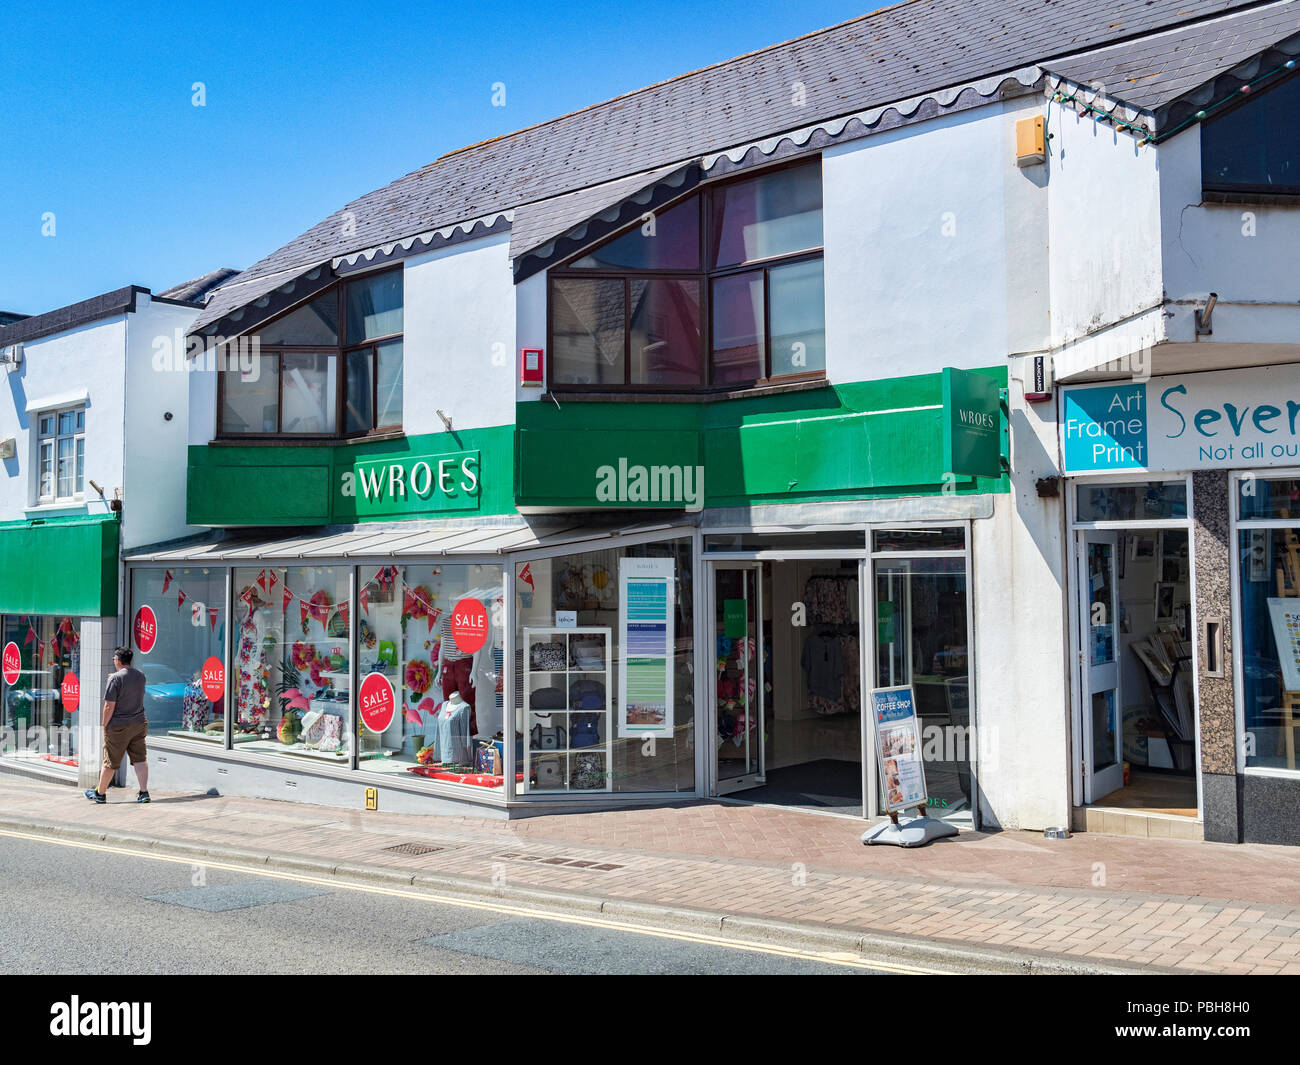 7 Juillet 2018 : Bude, Cornwall, UK - Wroes Department store à Belle Vue, Bude, Cornwall, UK. Banque D'Images